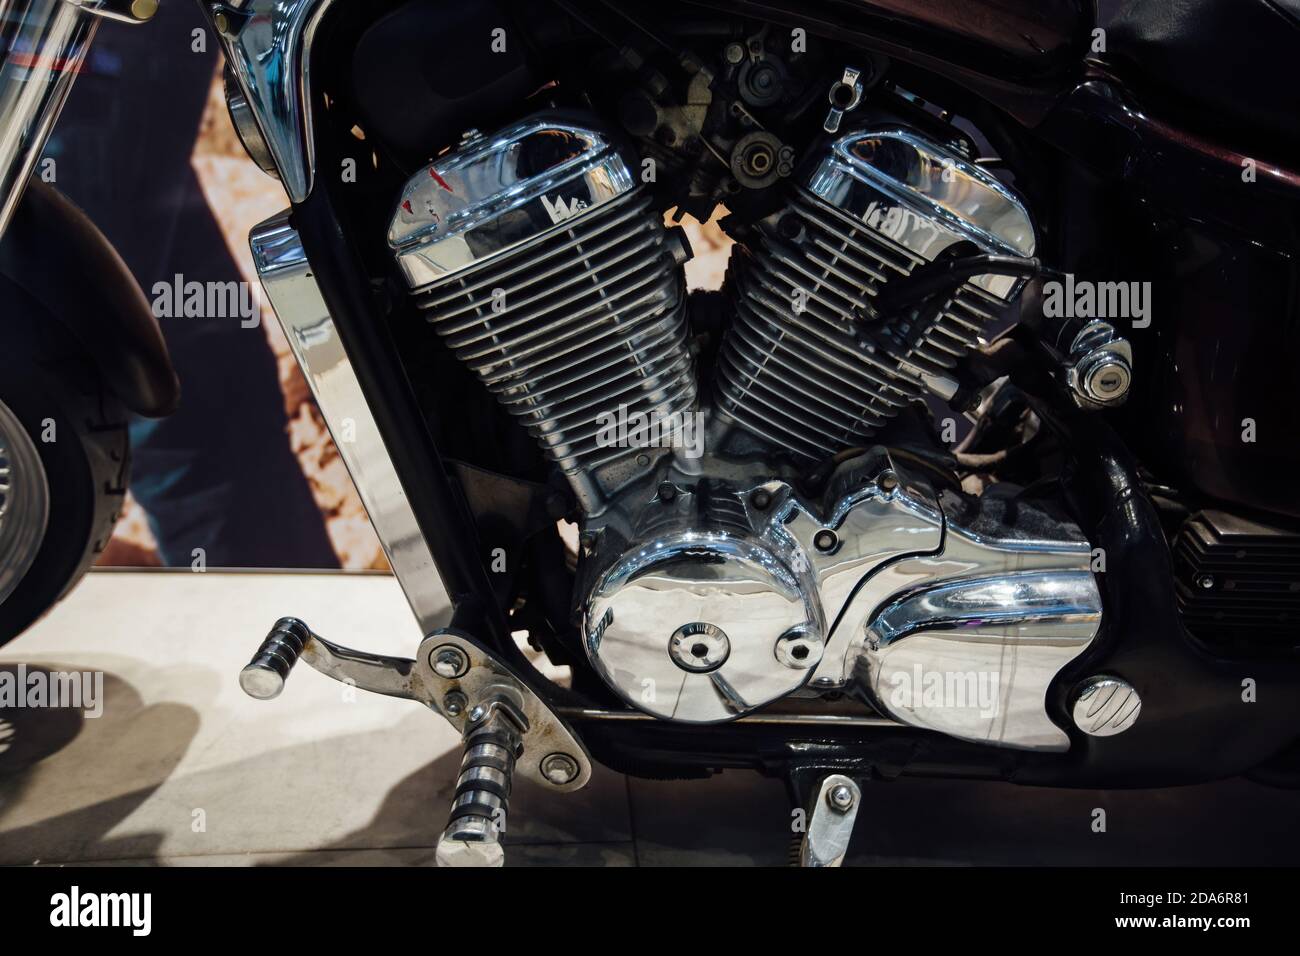 The Motorcycle engine, close up view of cylinders Stock Photo